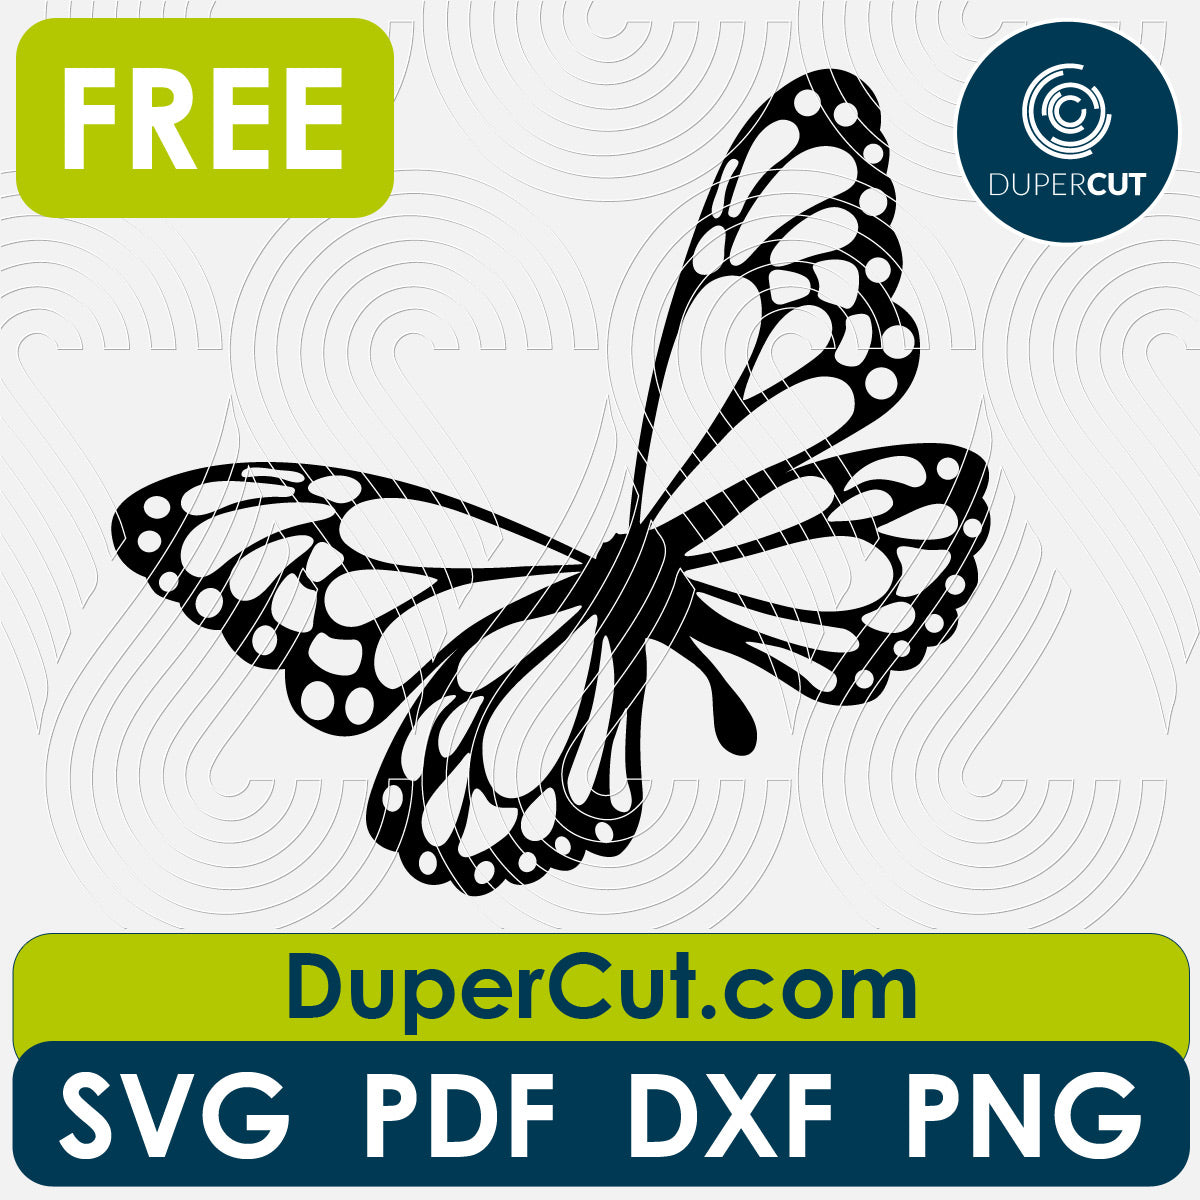 Butterfly, FREE cutting template SVG PNG DXF files for Glowforge, Cricut, Silhouette, CNC laser router by DuperCut.com